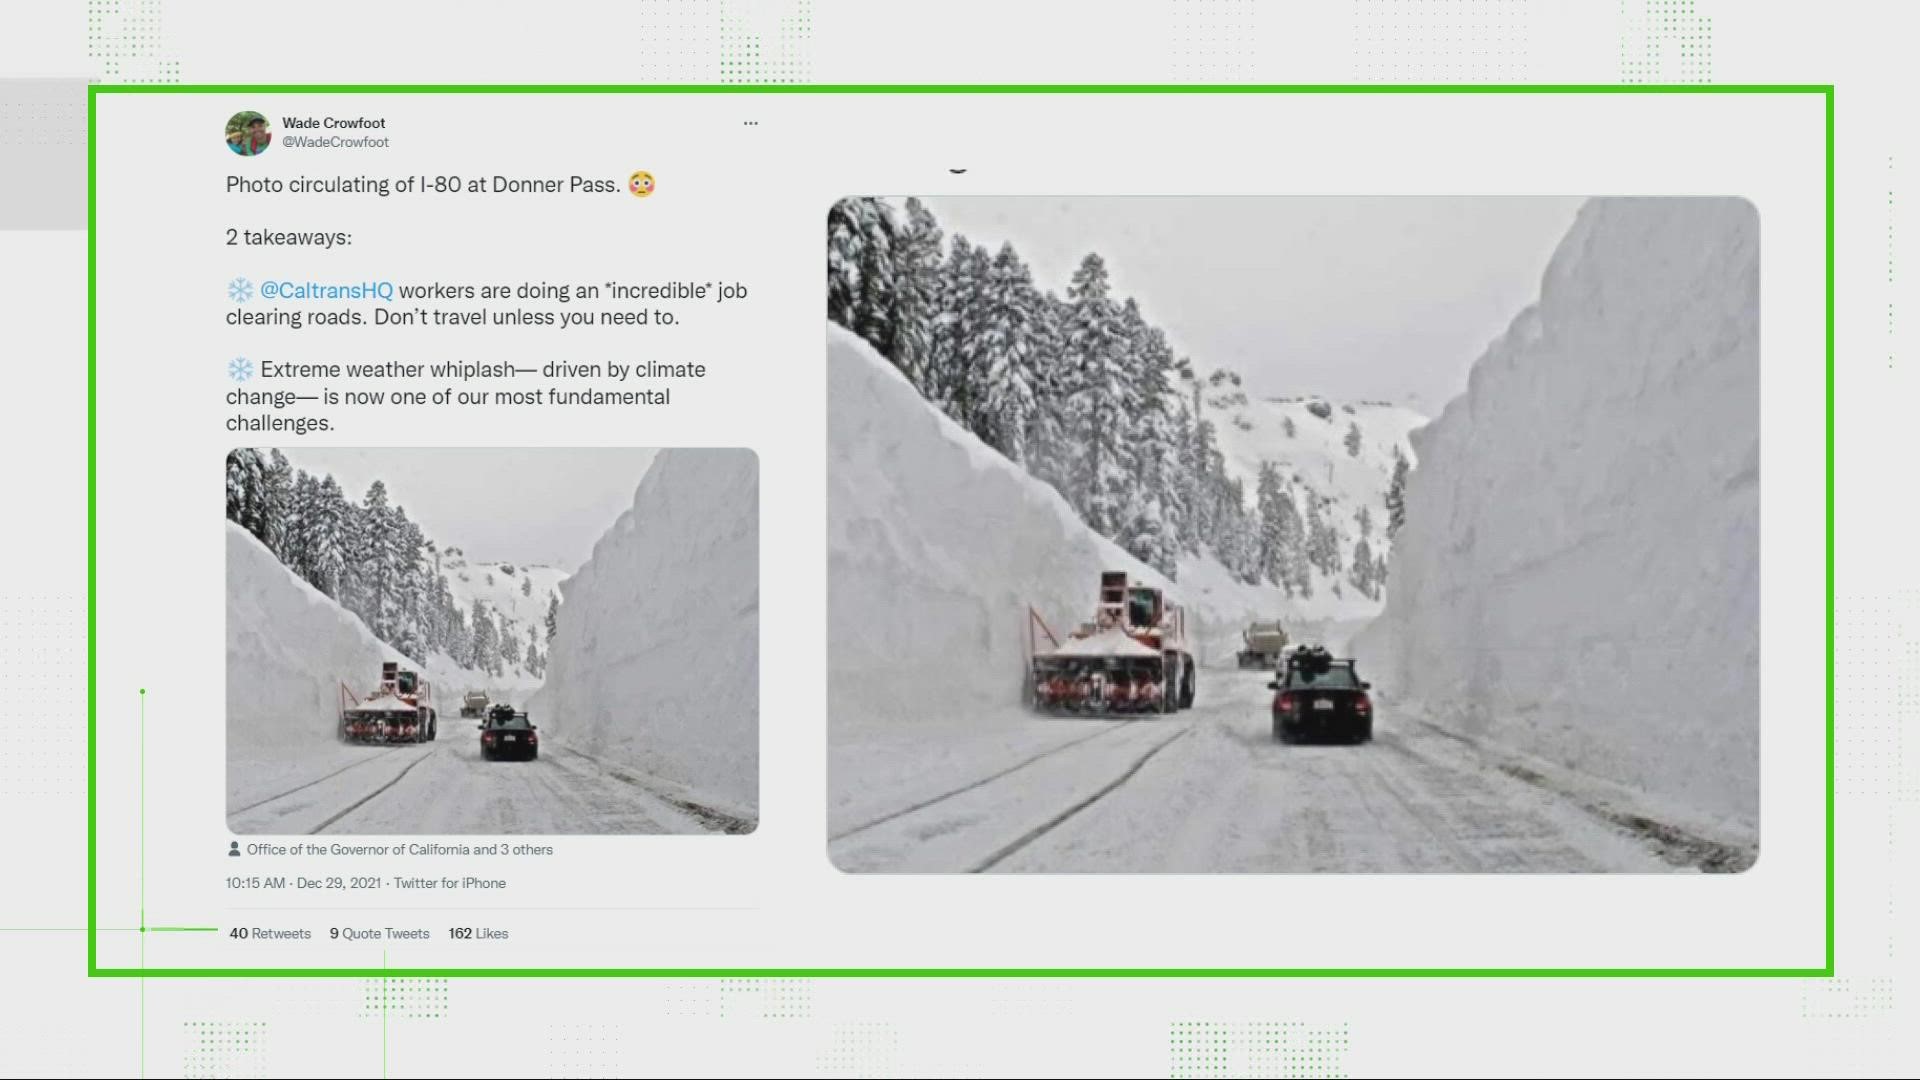 A social media post is claiming 12 feet of snow fell at I-80 at Donner Pass amid recent winter storm.